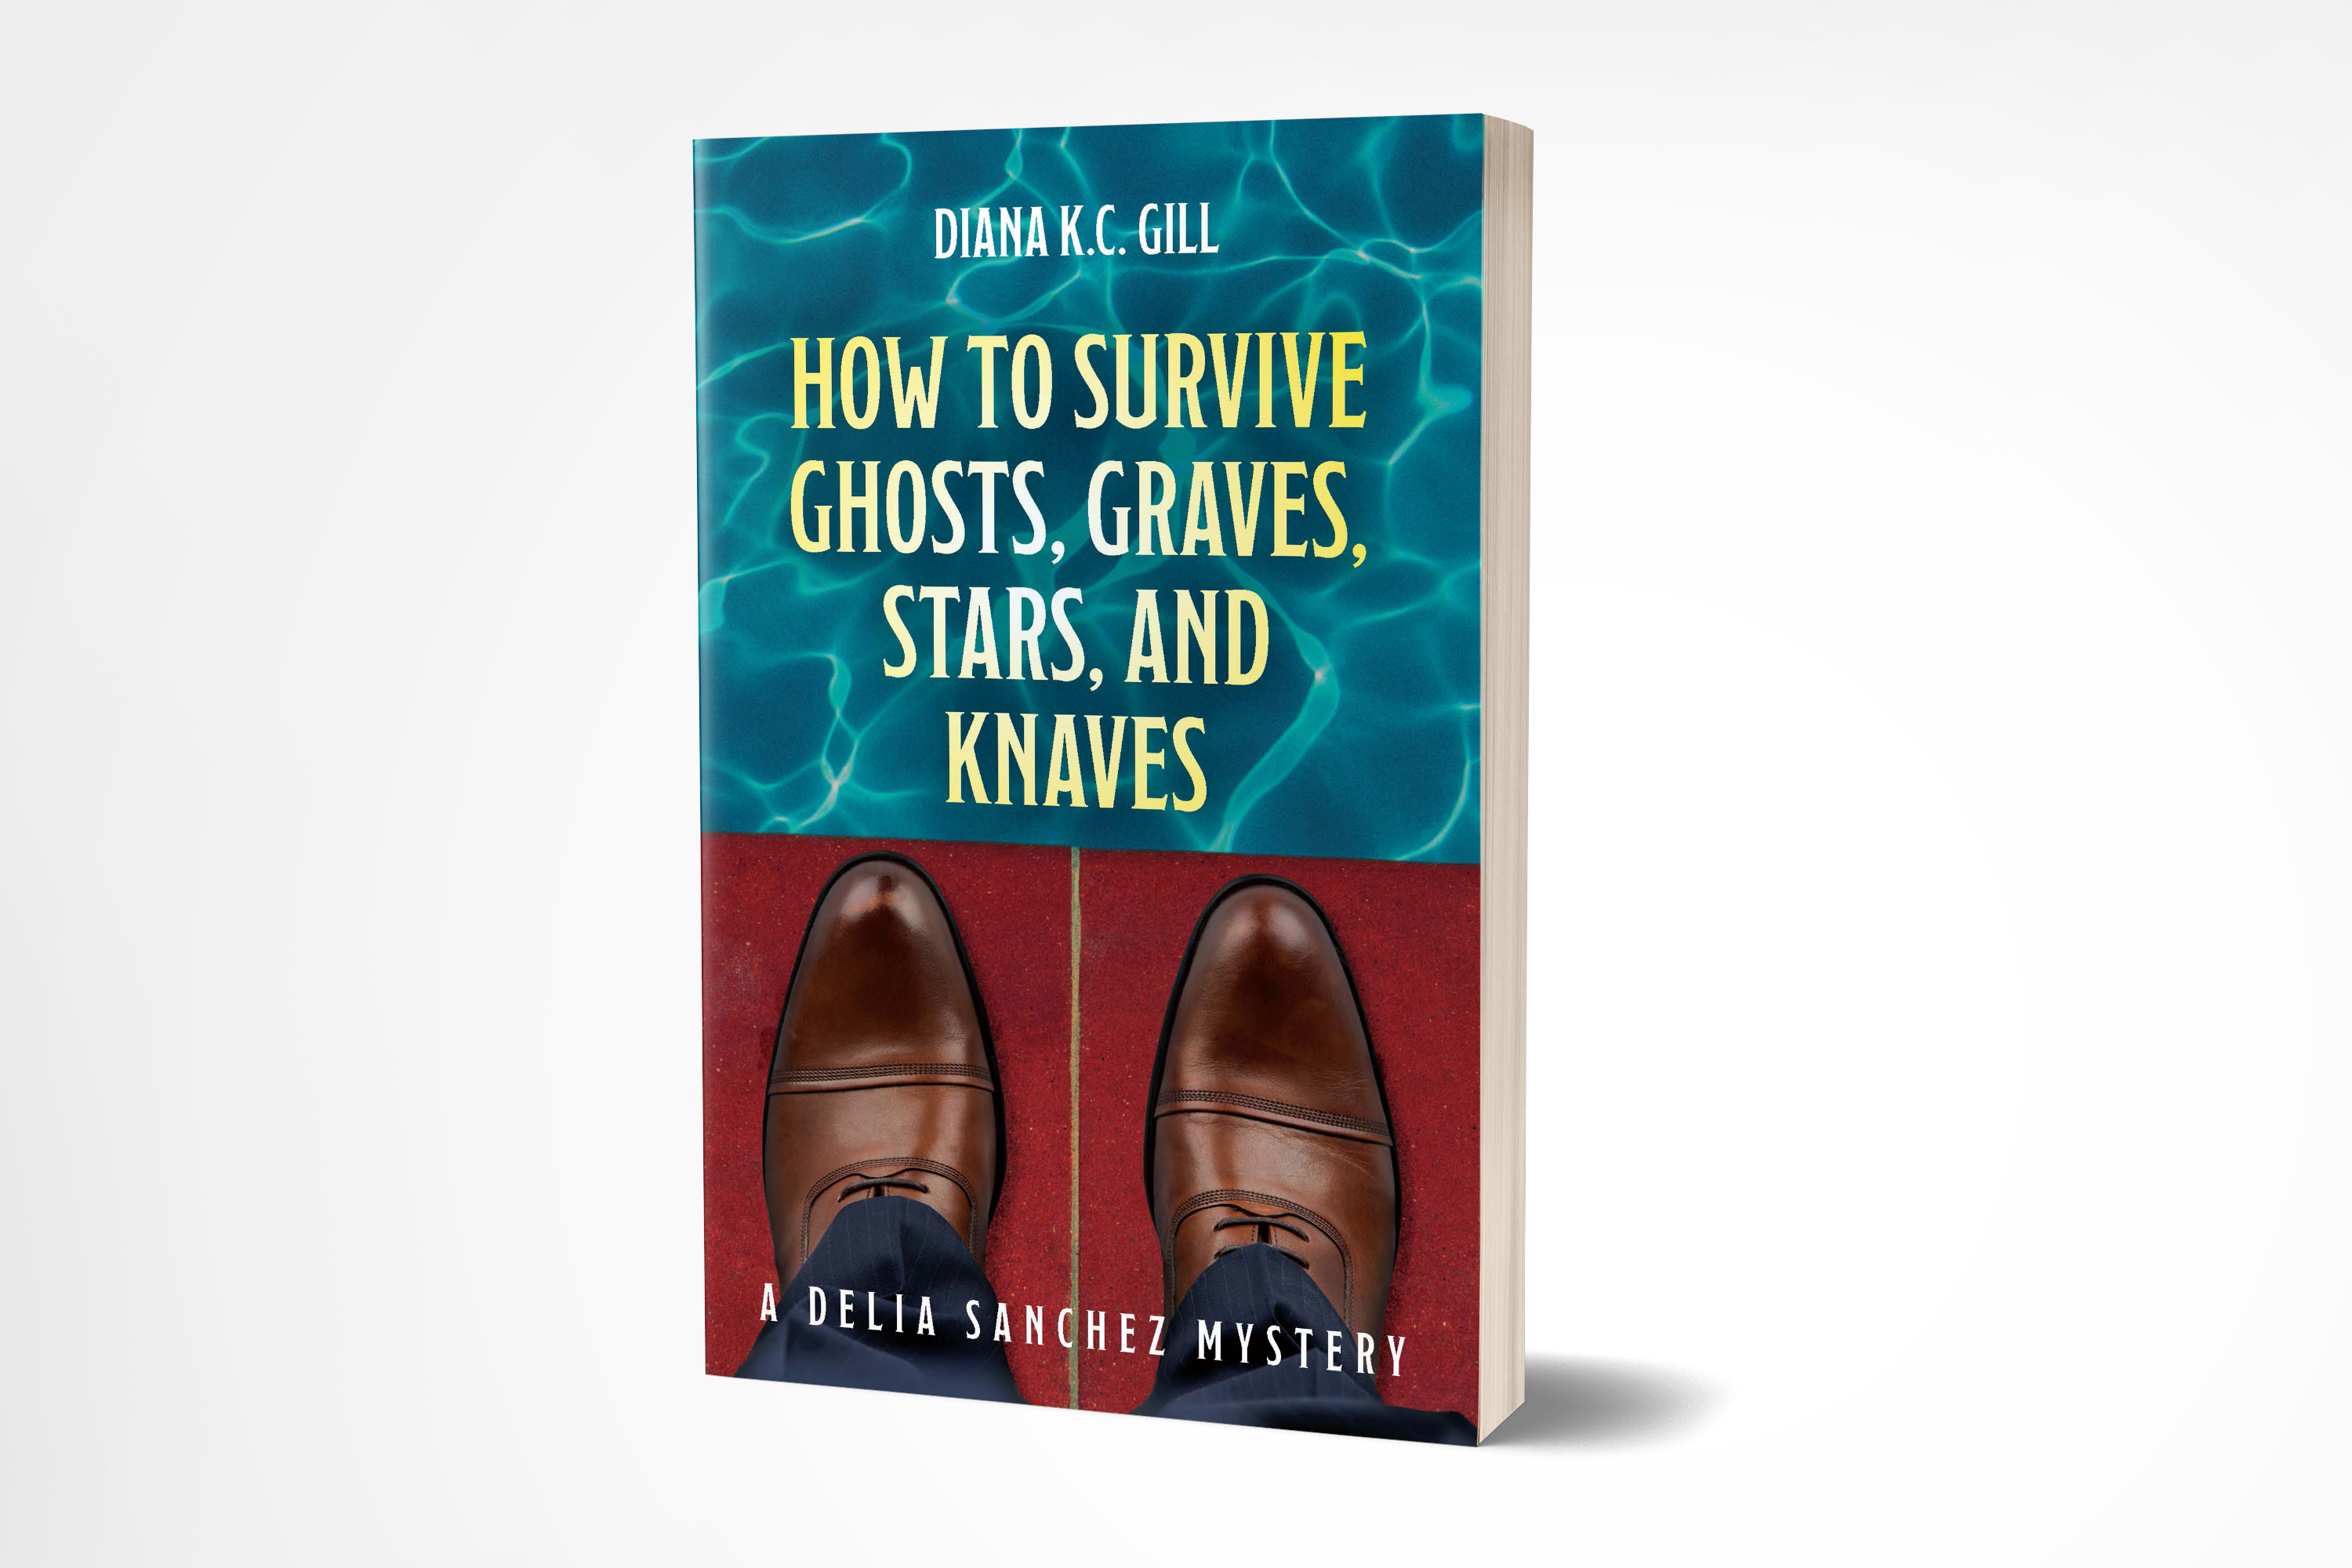 HOW TO SURVIVE GHOSTS, GRAVES, STARS, AND KNAVES